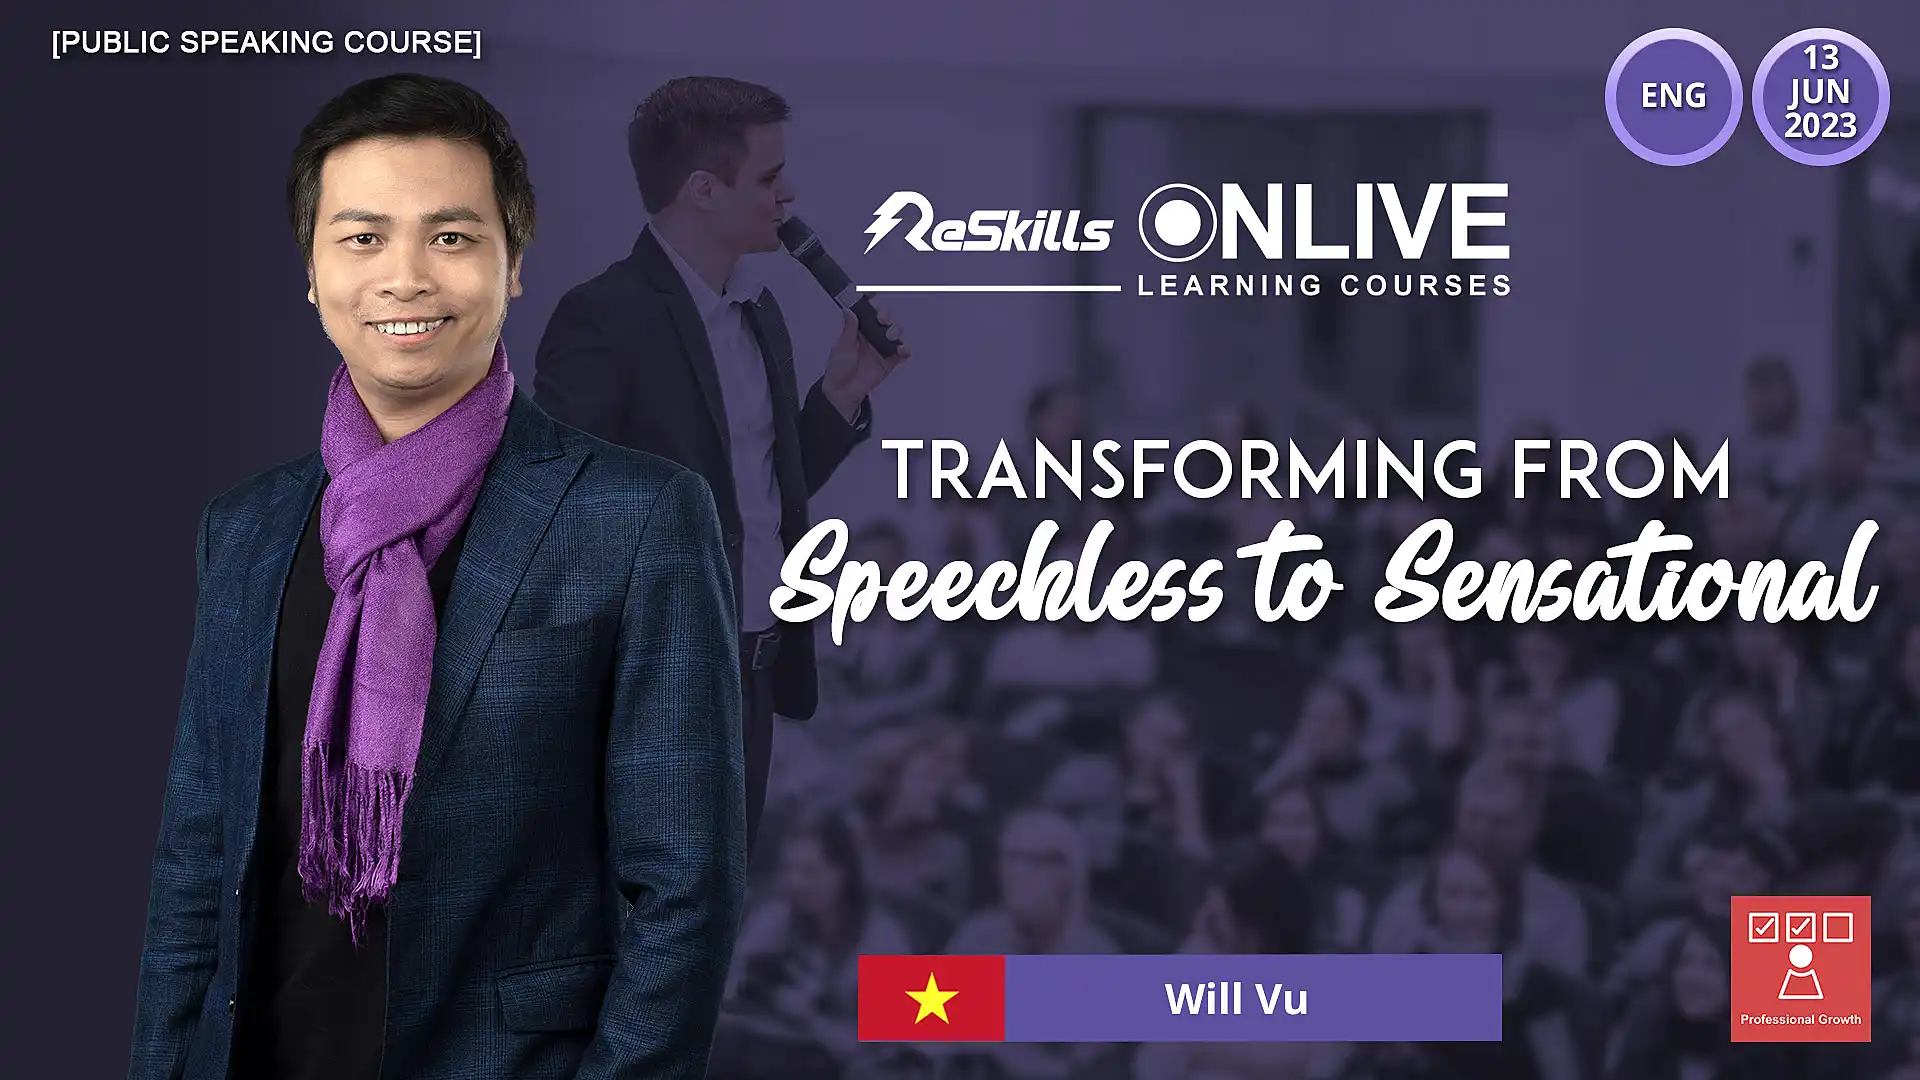 [Public Speaking Course] Transforming from Speechless to Sensational - ReSkills